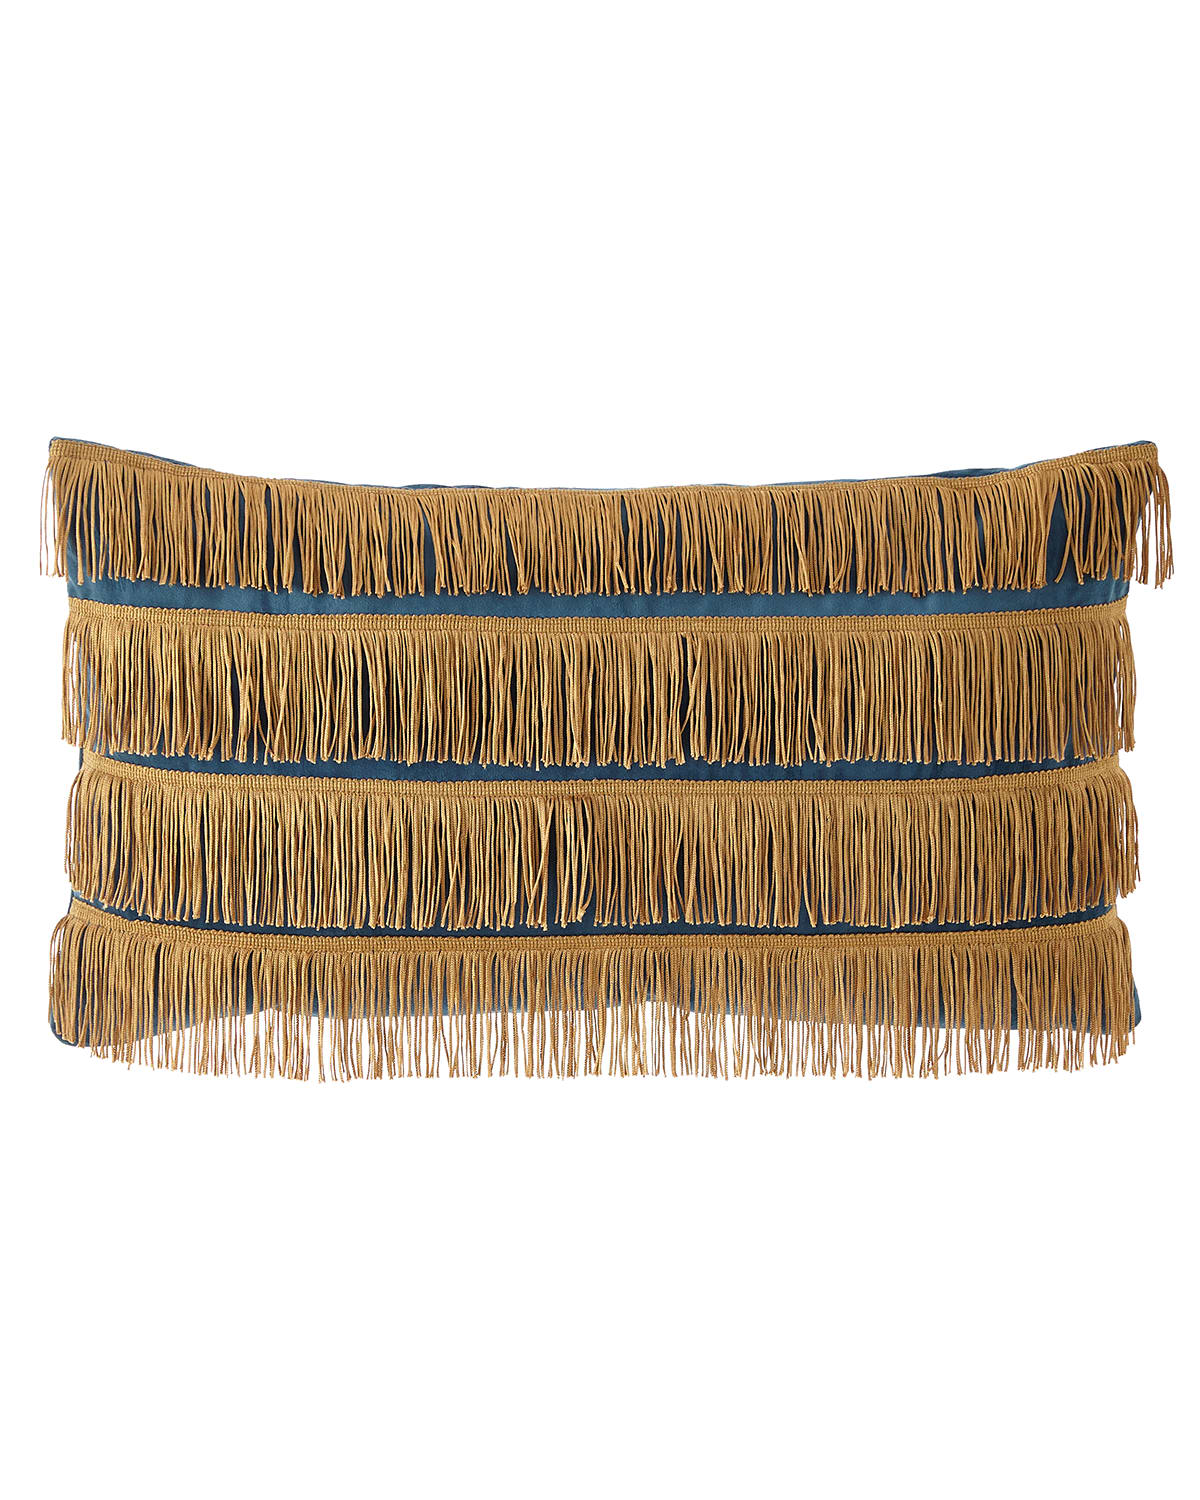 Image Dian Austin Couture Home Emporium Oblong Pillow with Gold Fringe